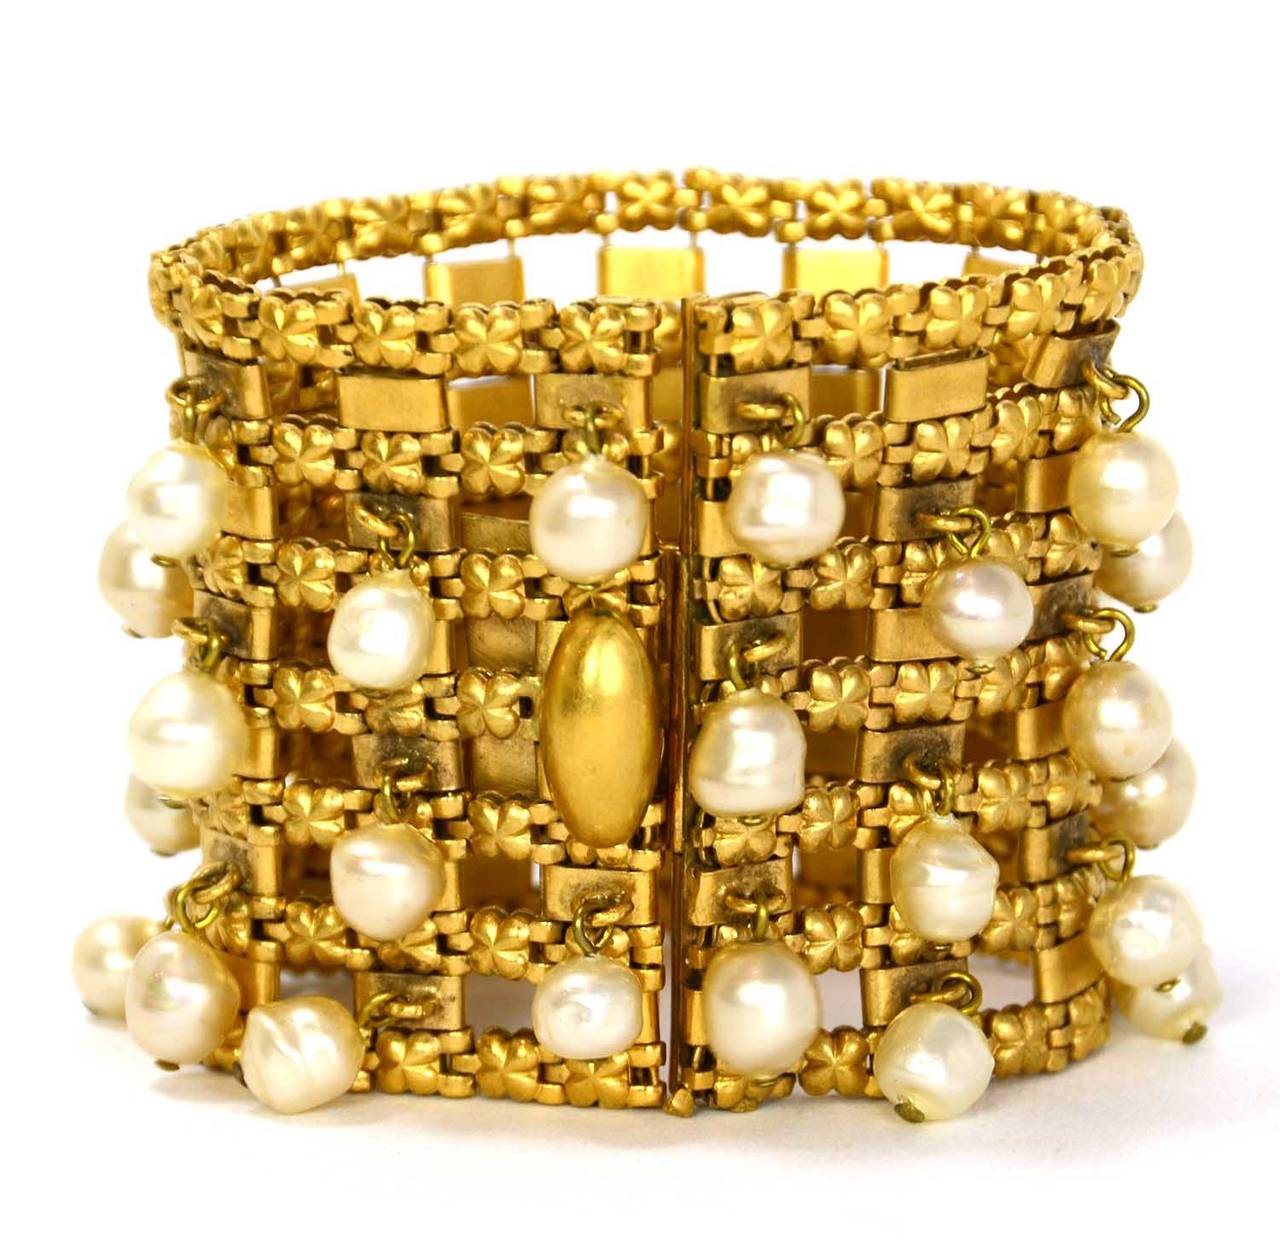 CHANEL Vintage 1950s/60's Goldtone Bracelet W/Hanging Pearls
Made in: France
Year of Production: Circa 1950's-60's
Stamp: CHANEL
Closure: Clip
Color: Goldtone and white
Materials: Metal and pearl
Overall Condition: